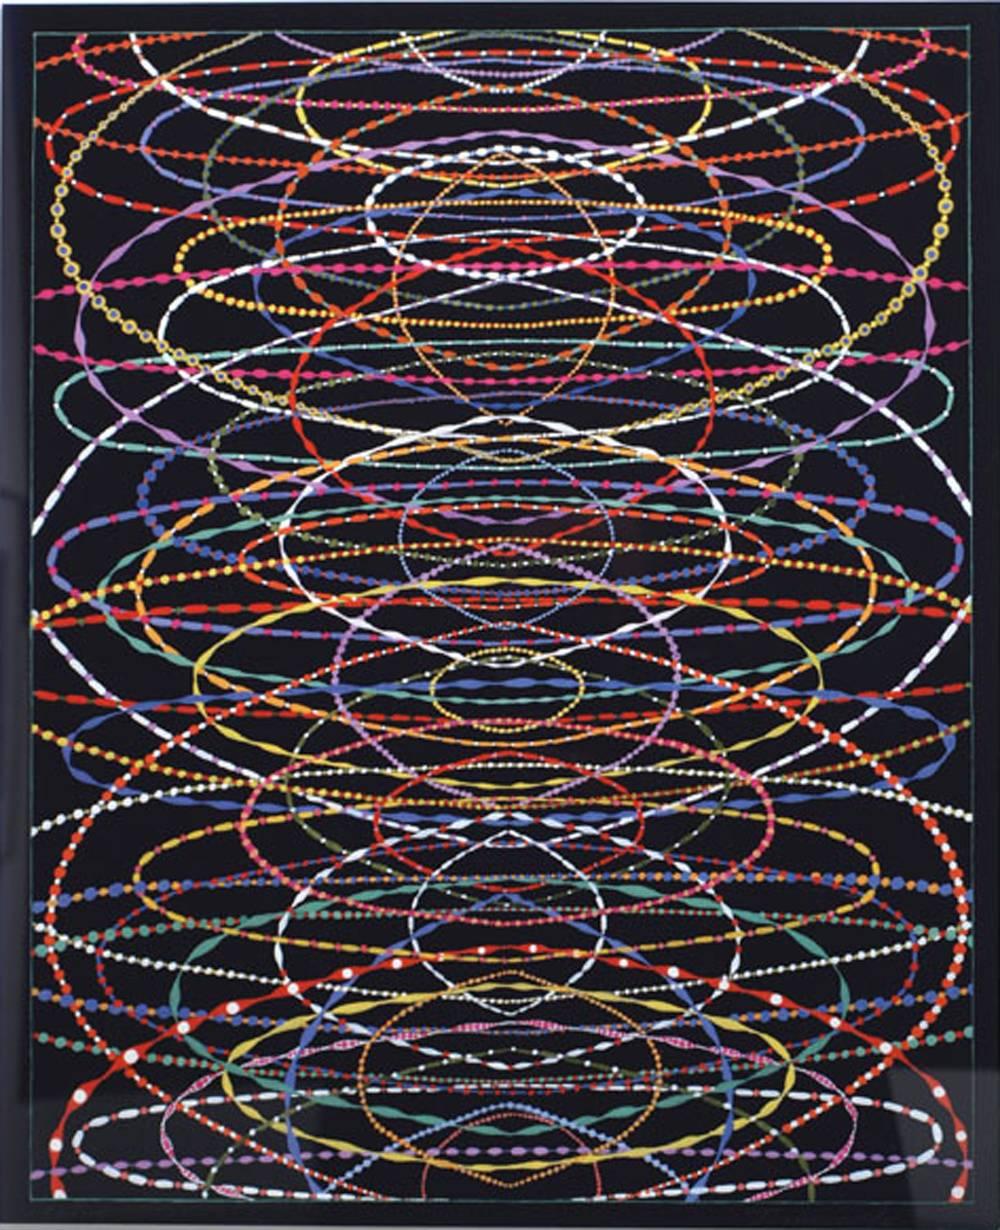 Fred Tomaselli Abstract Print - After Echolocation #2